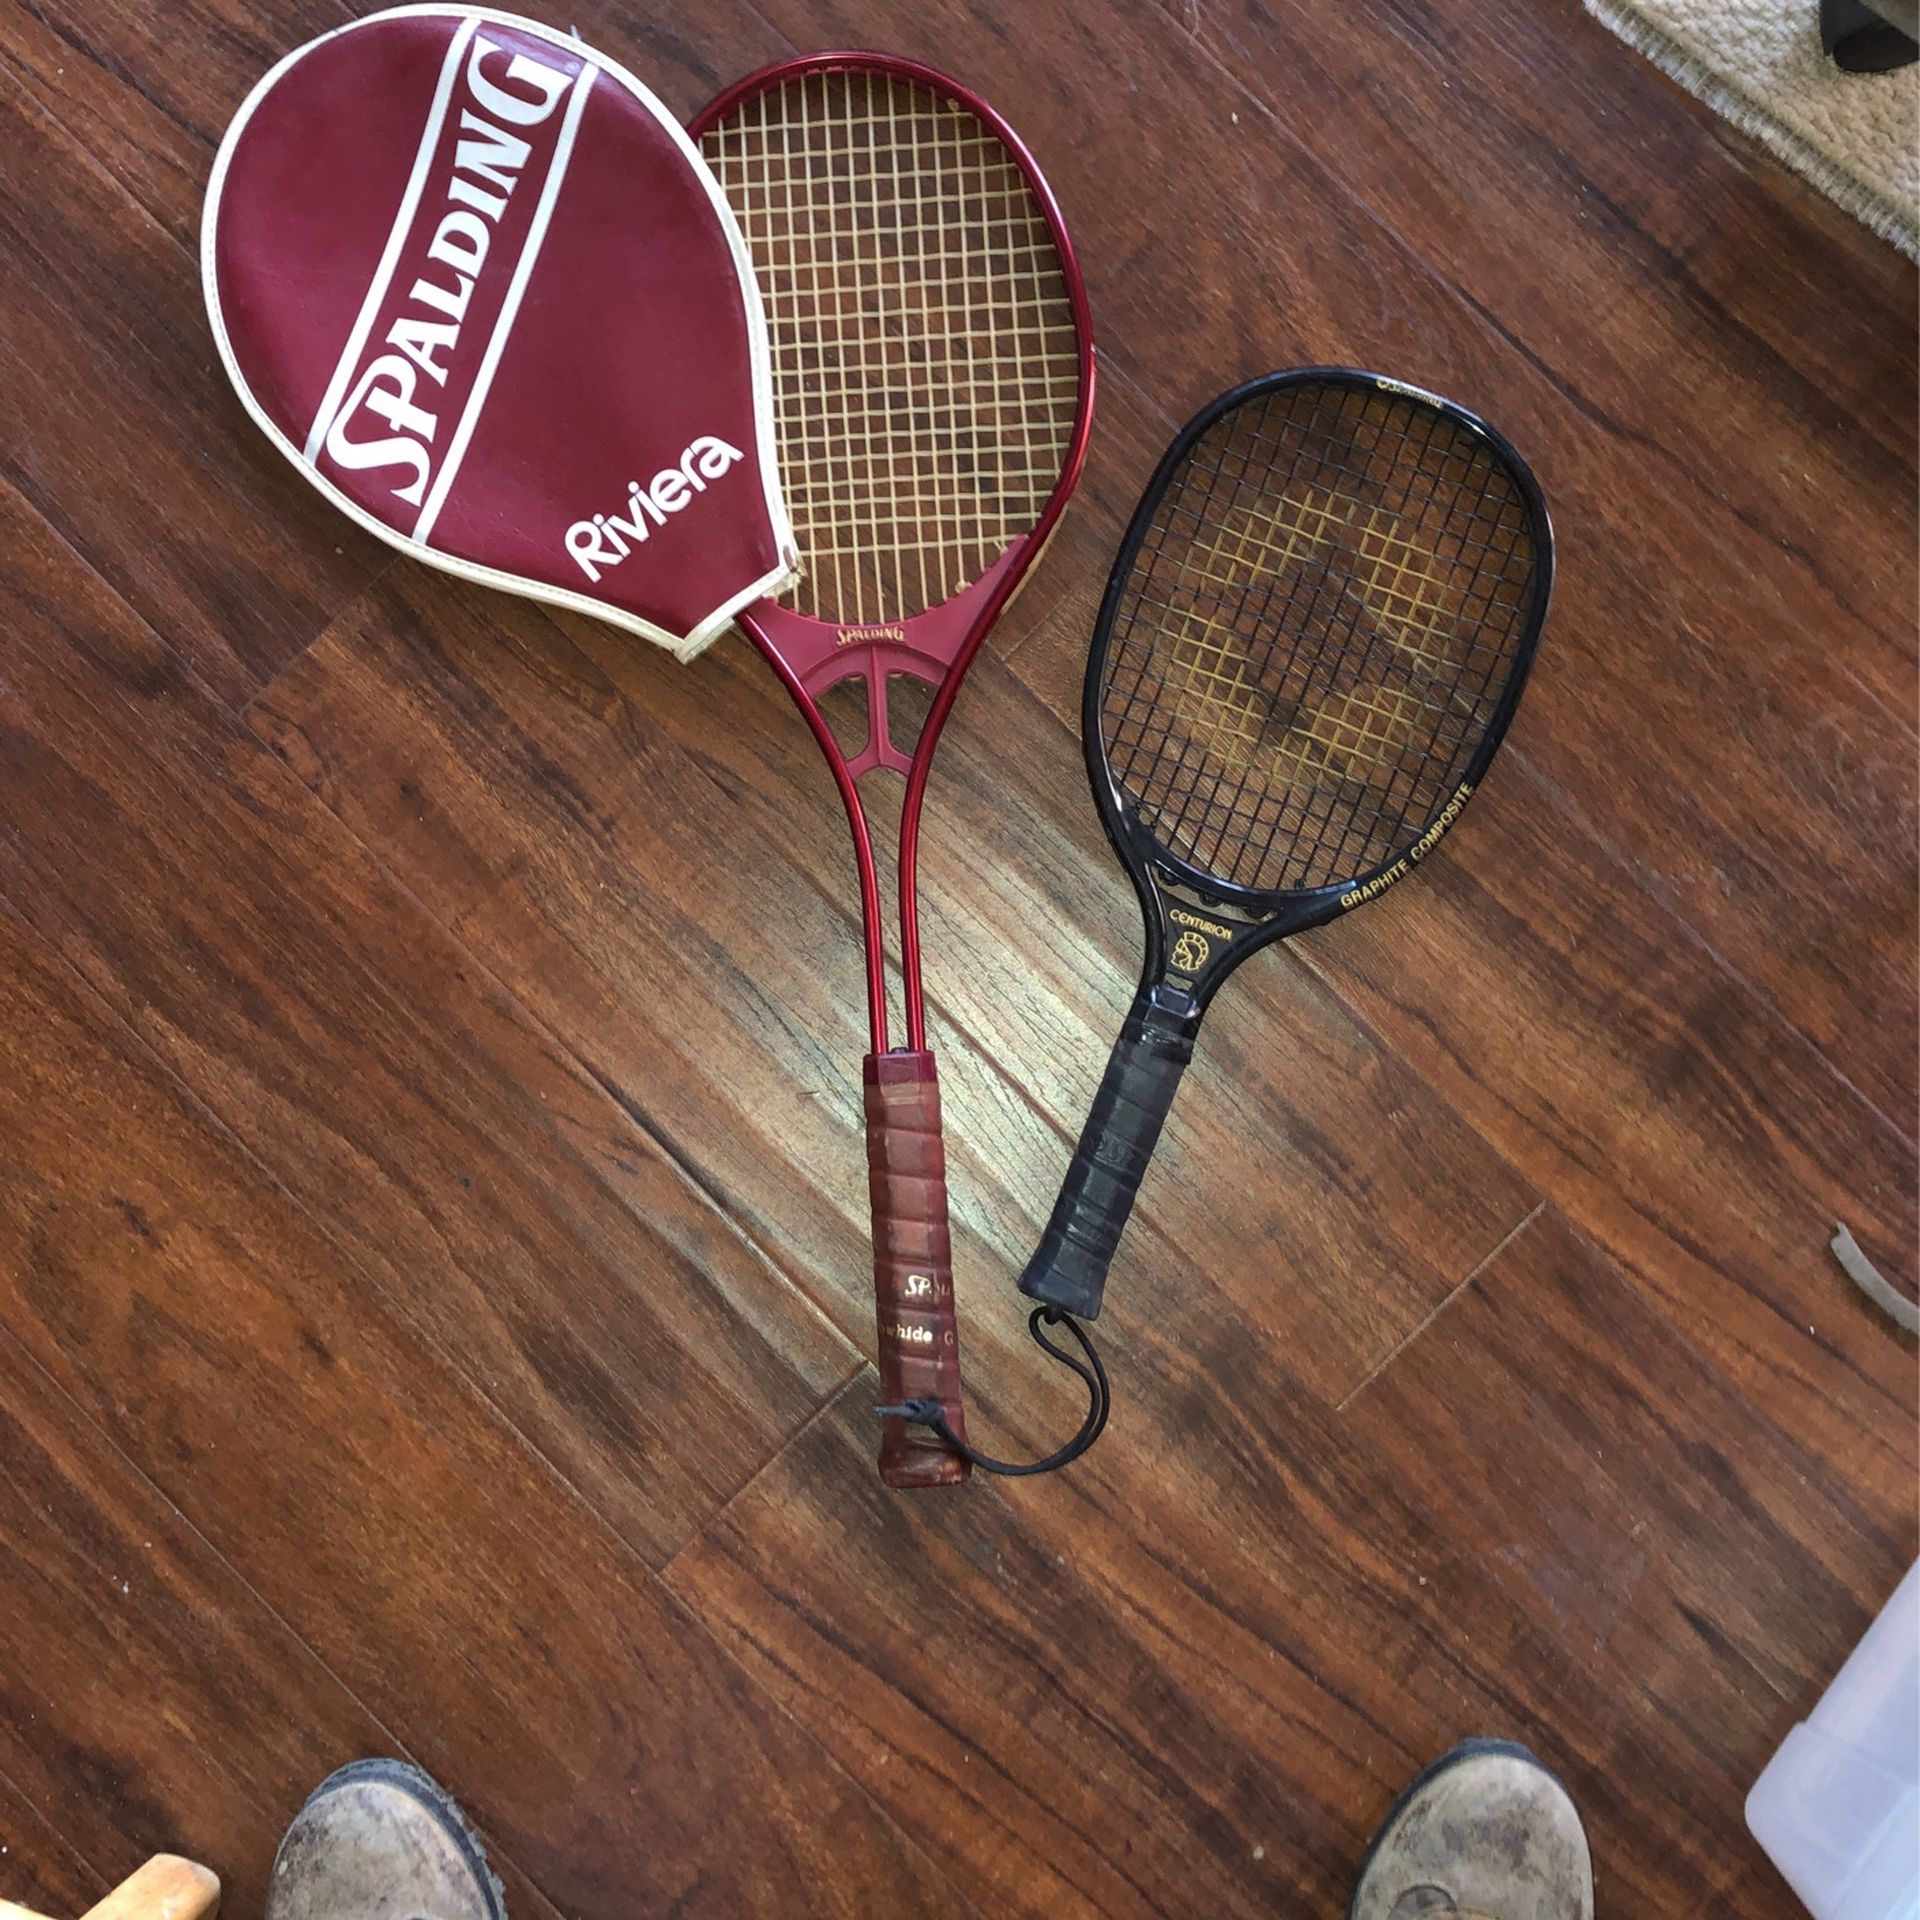 Tennis and racquetball rackets $10 for both